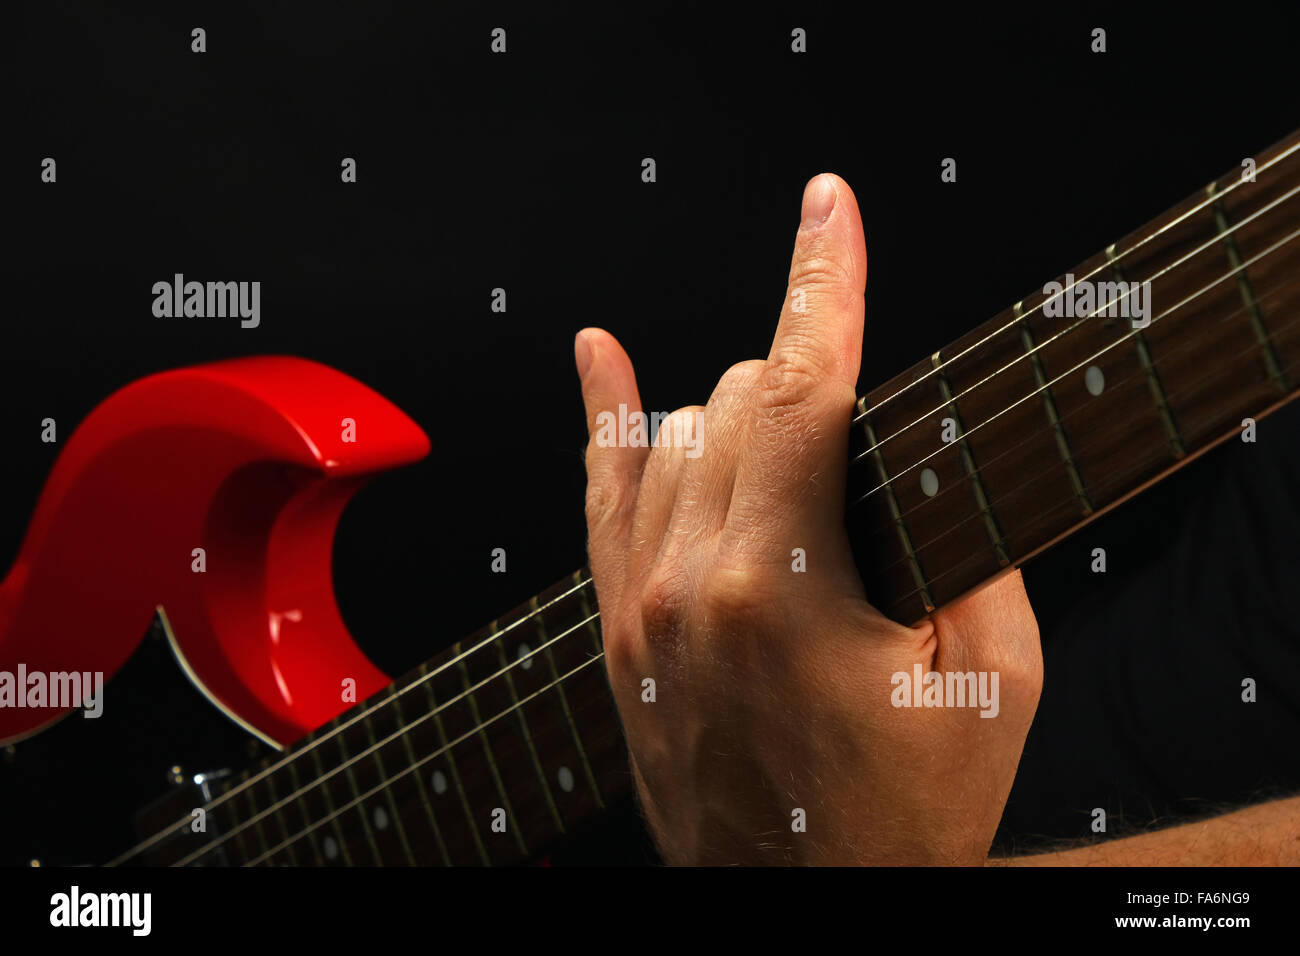 Male hand holding red sg guitar neck with devil horns rock metal sign isolated on black background Stock Photo